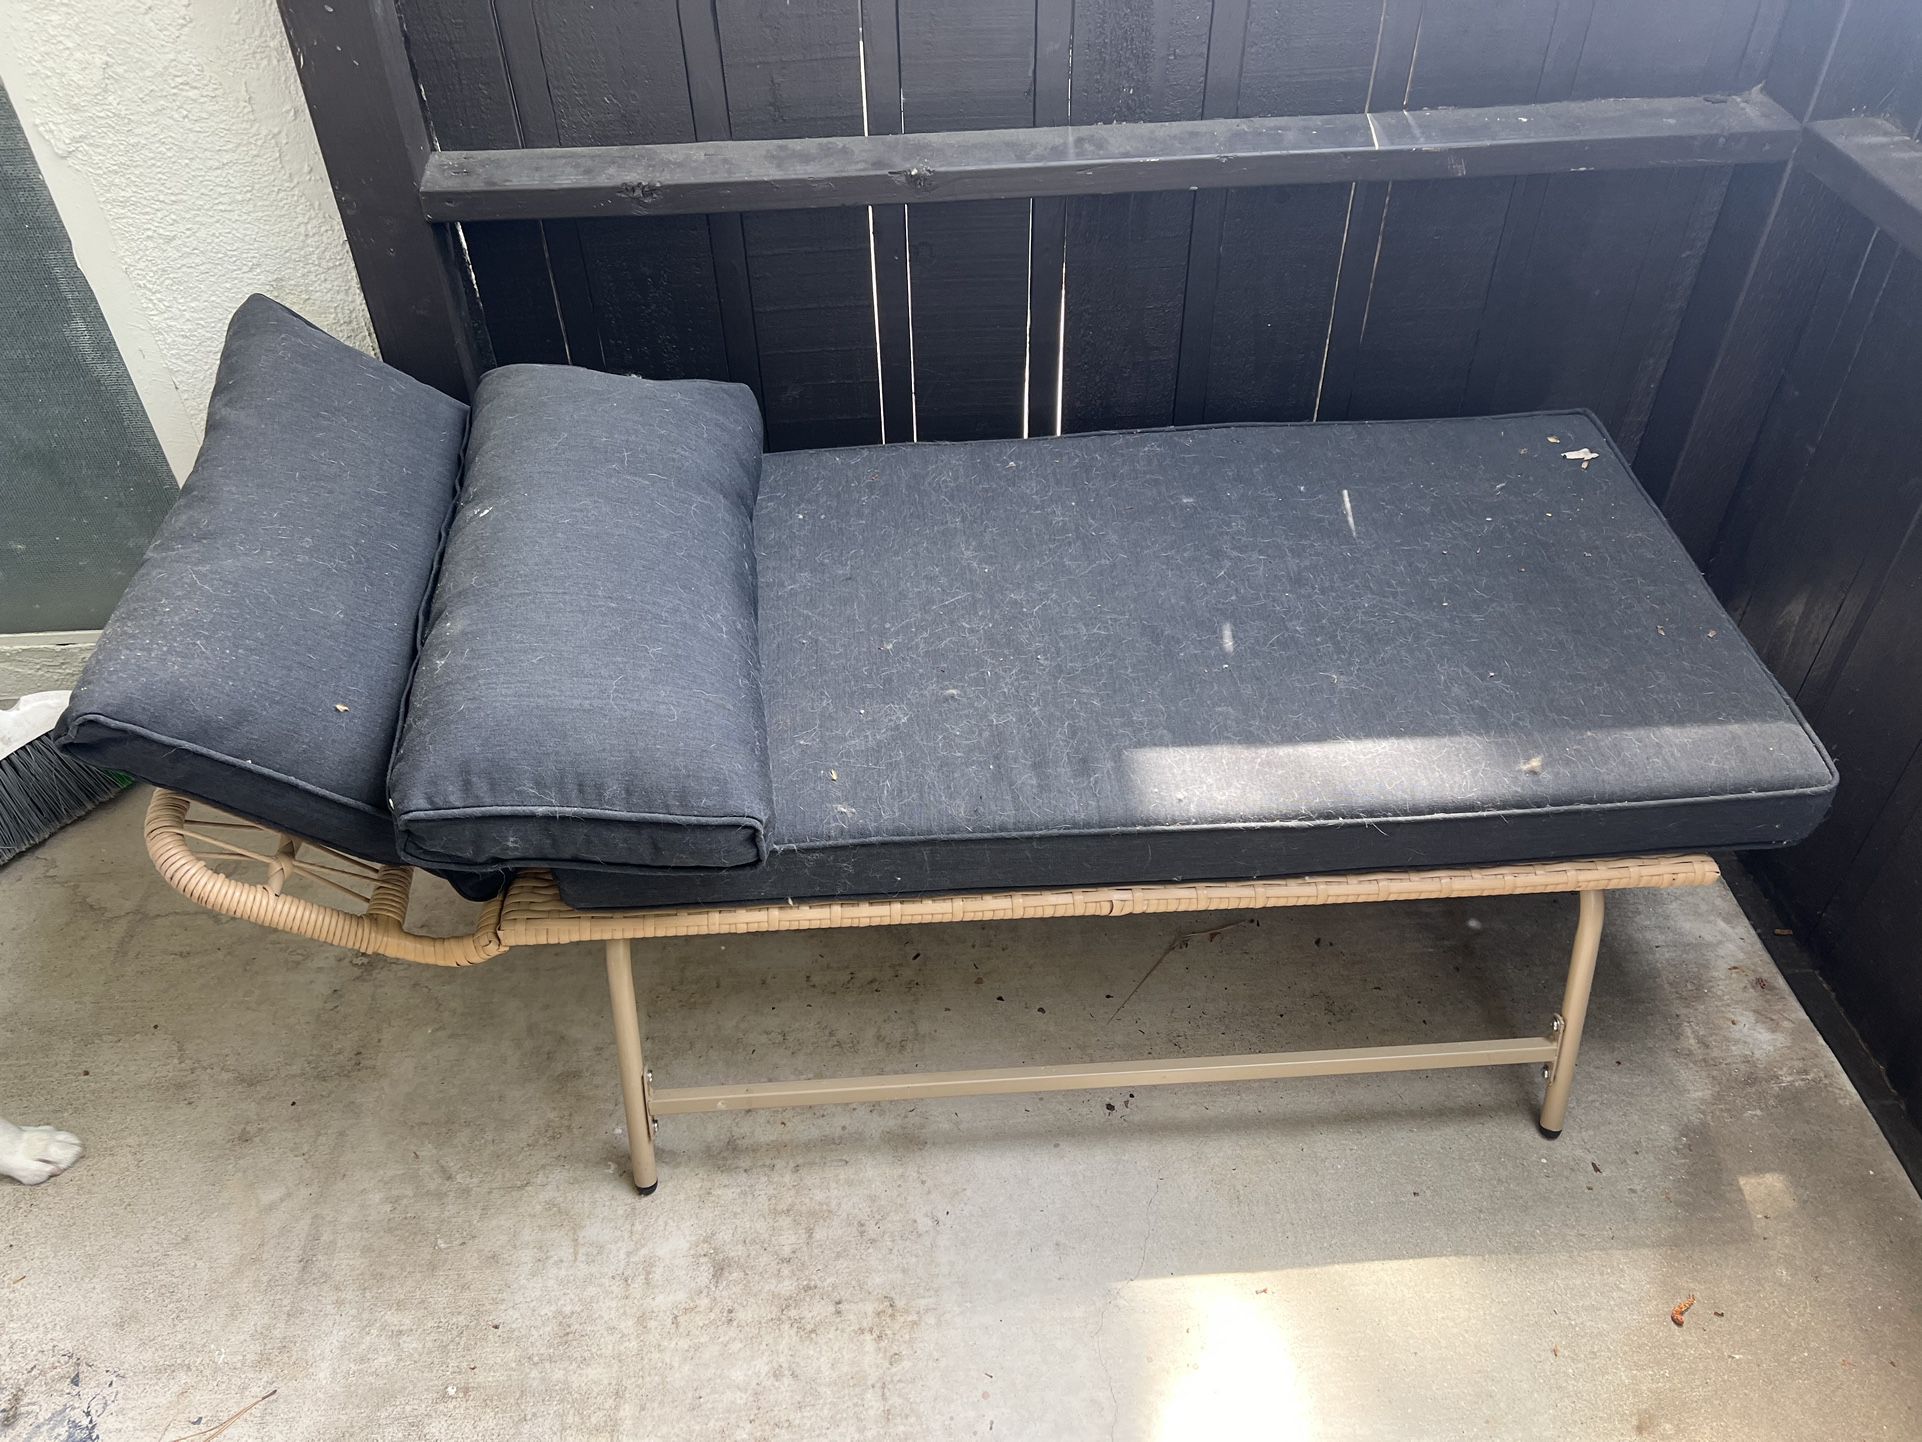 MOVING SALE Patio Furniture Sofa With Pillows 